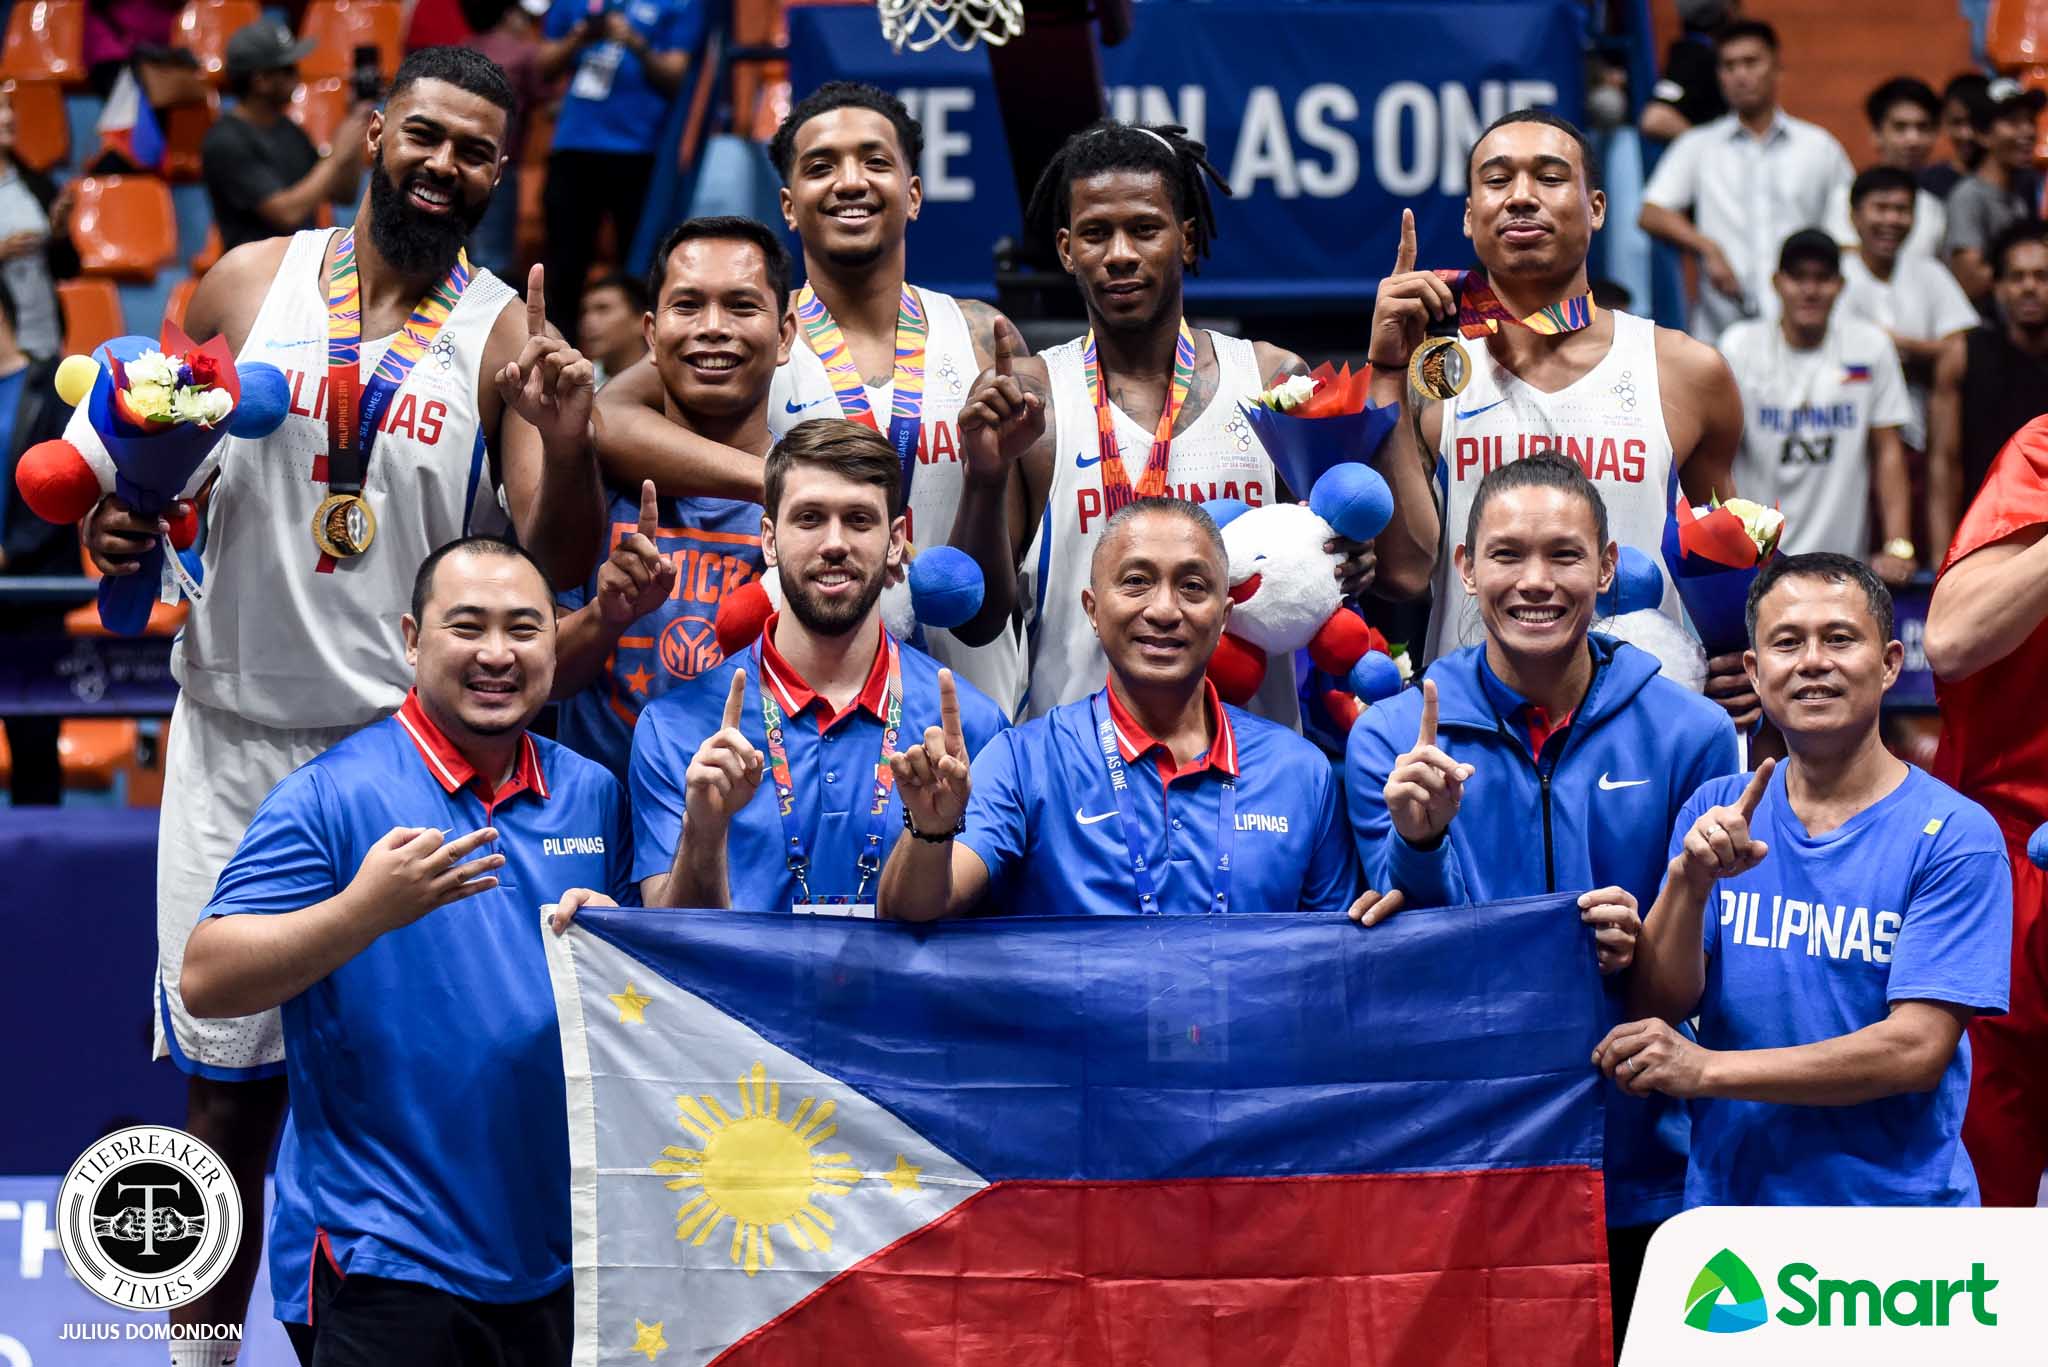 2019-sea-games-gilas-pilipinas-3x3-gold Limitless Appmasters to compose Gilas 3x3 in SEAG 2021 SEA Games 3x3 Basketball Gilas Pilipinas News  - philippine sports news